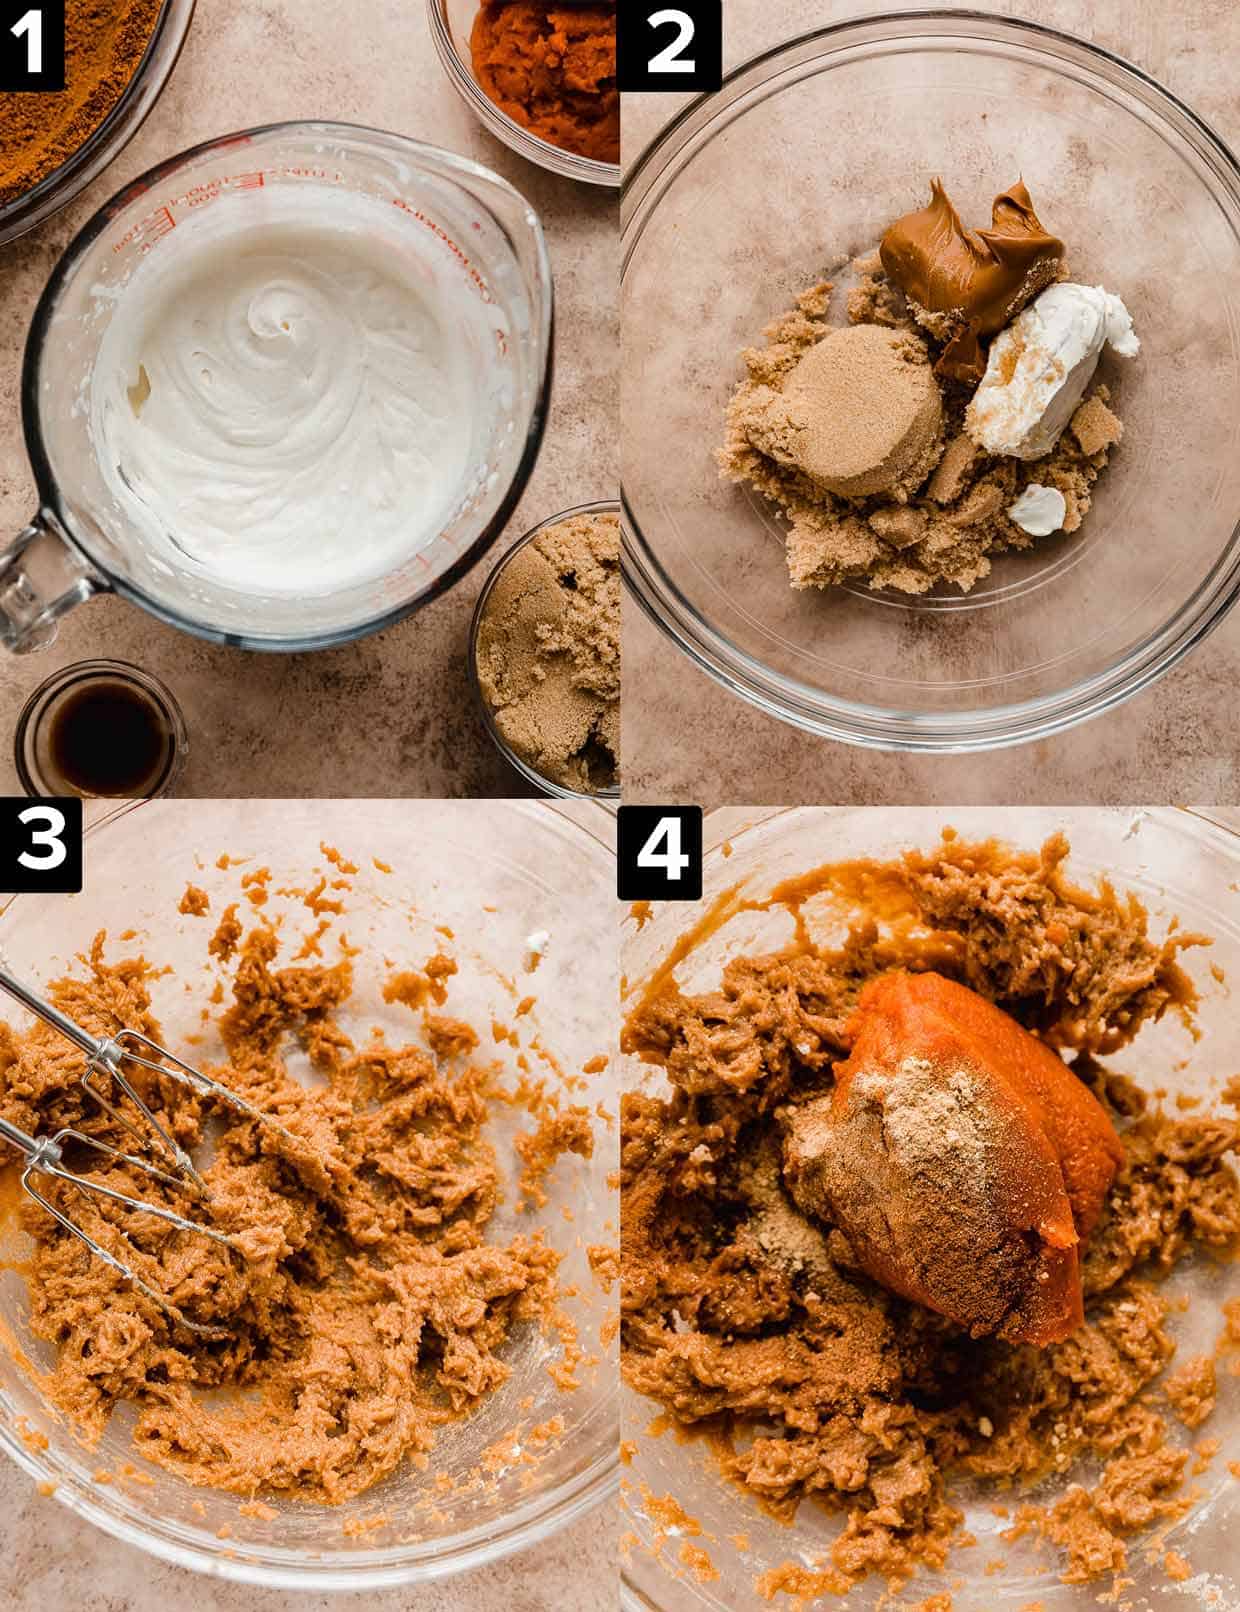 Four photos showing the making of Biscoff Pumpkin Pie, whipped cream, and then ingredients in a glass bowl.